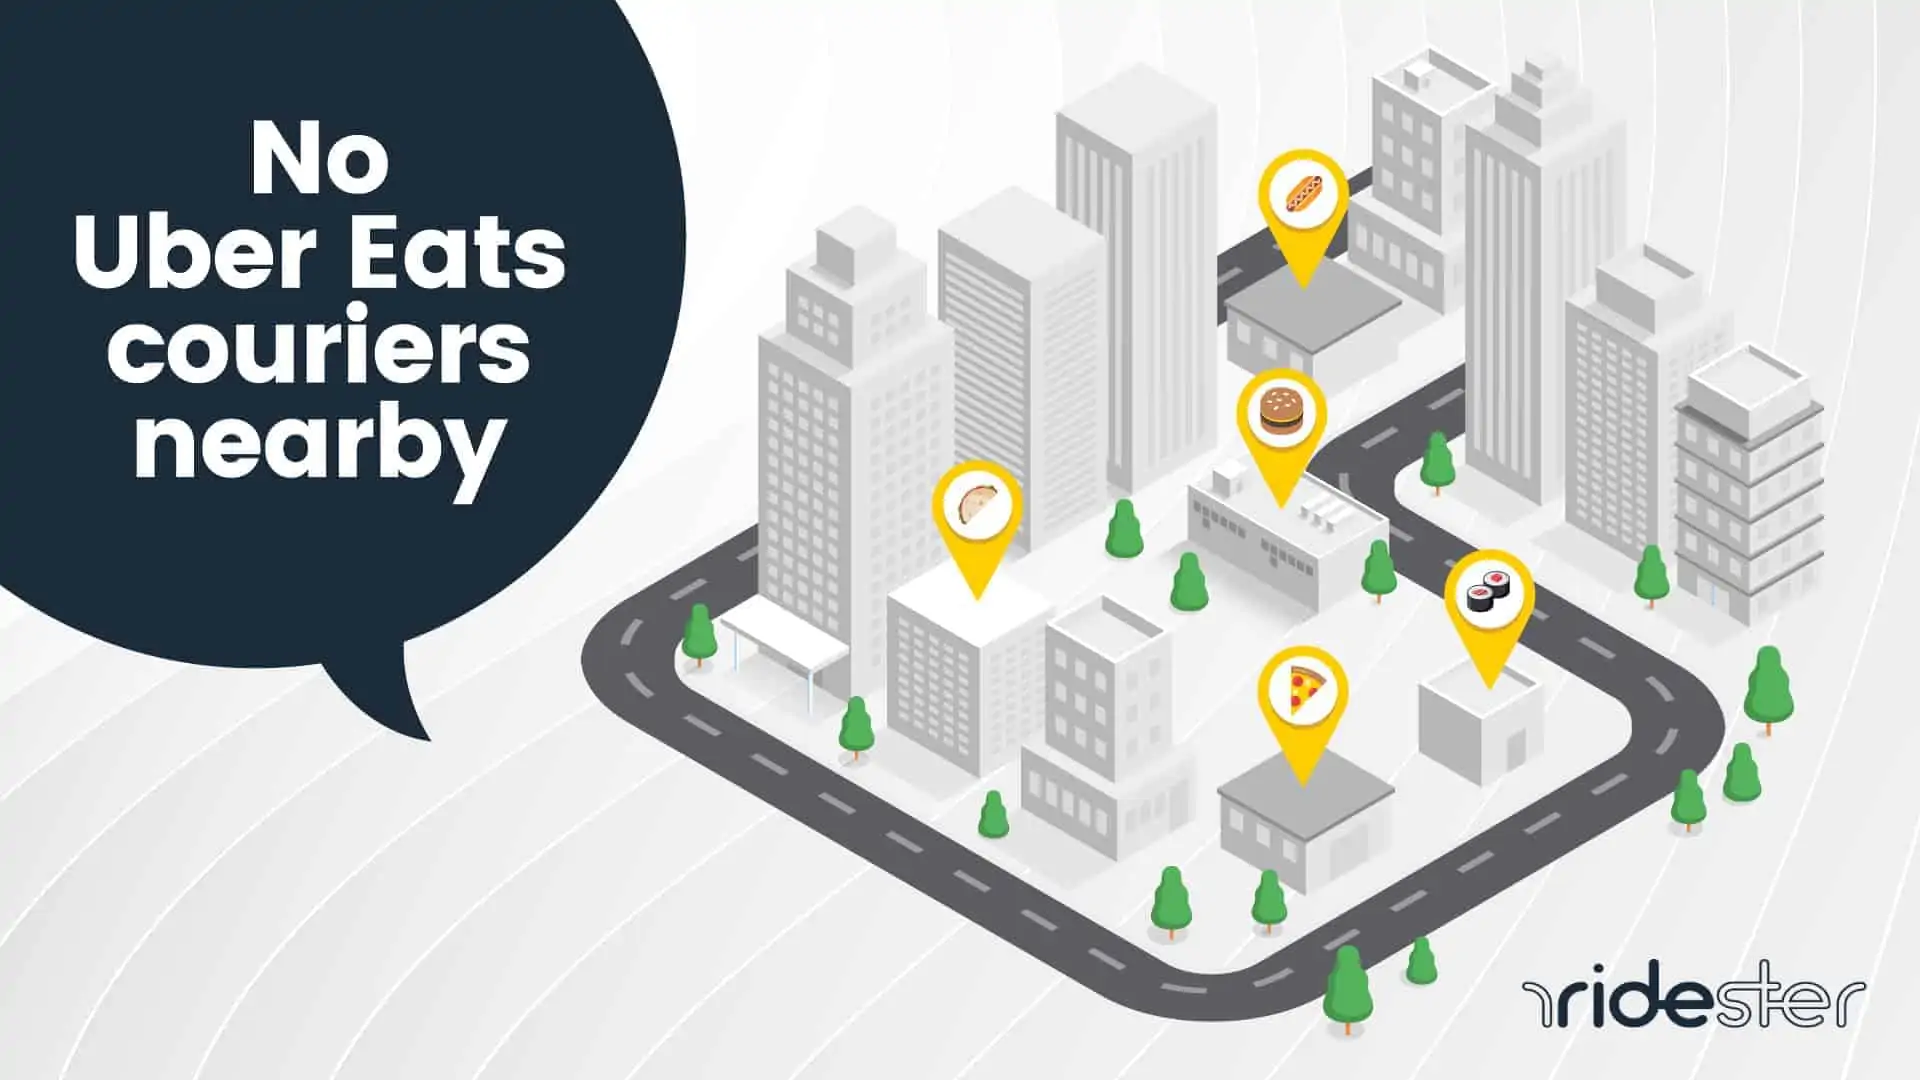 vector graphic showing a city with deliveries waiting to be picked up and the text "no uber eats couriers nearby" displayed in a speech bubble above the city